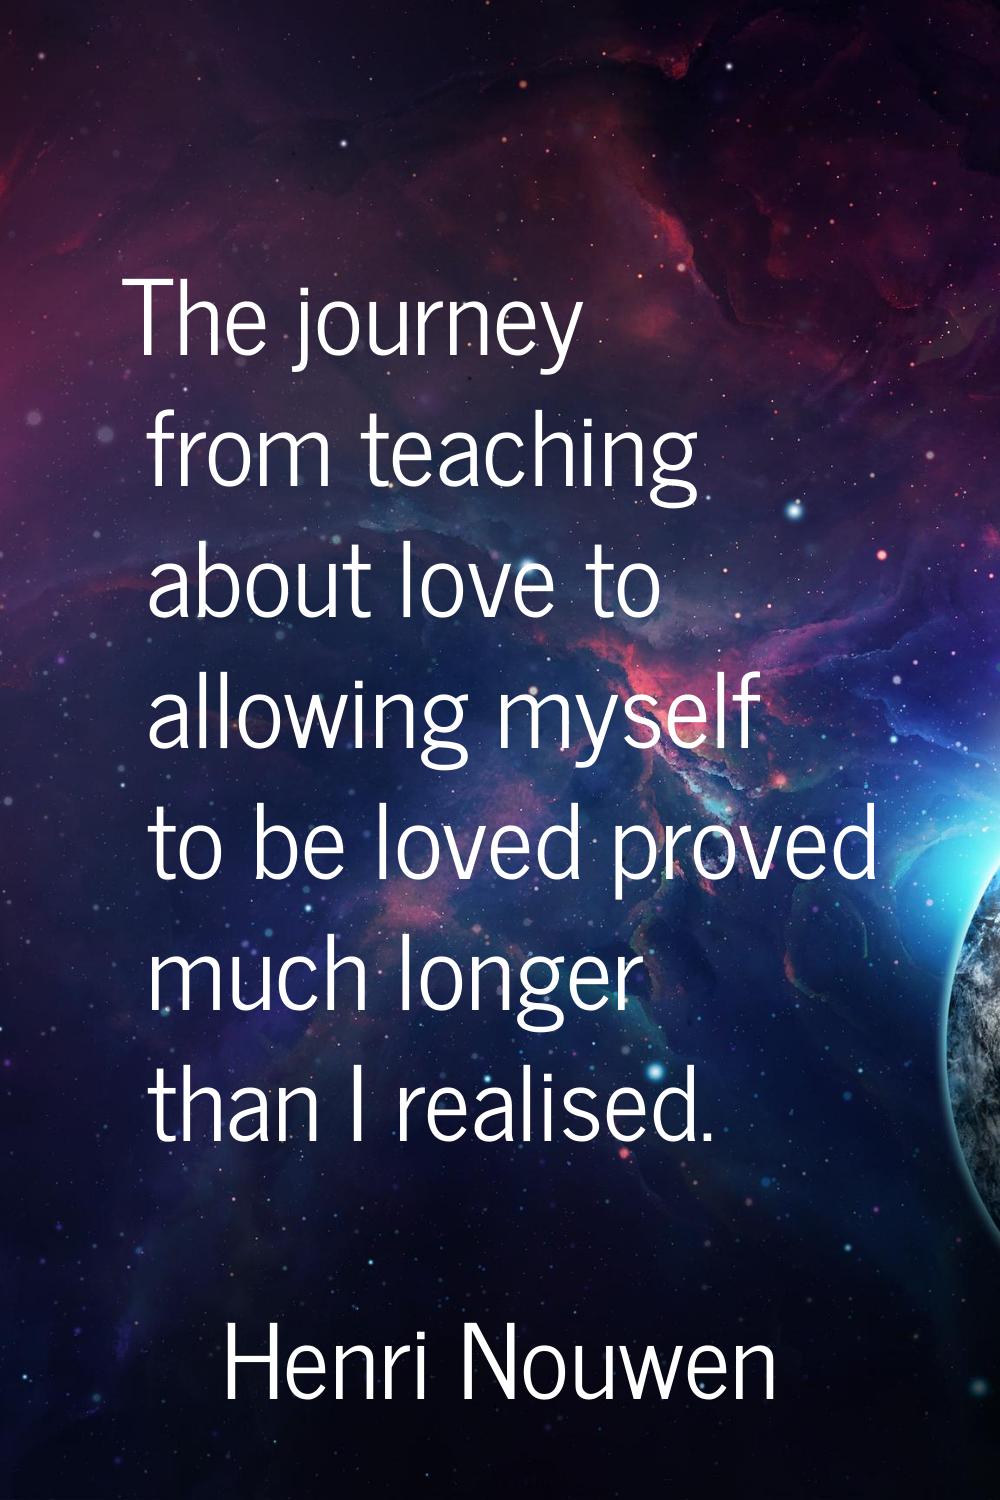 The journey from teaching about love to allowing myself to be loved proved much longer than I reali